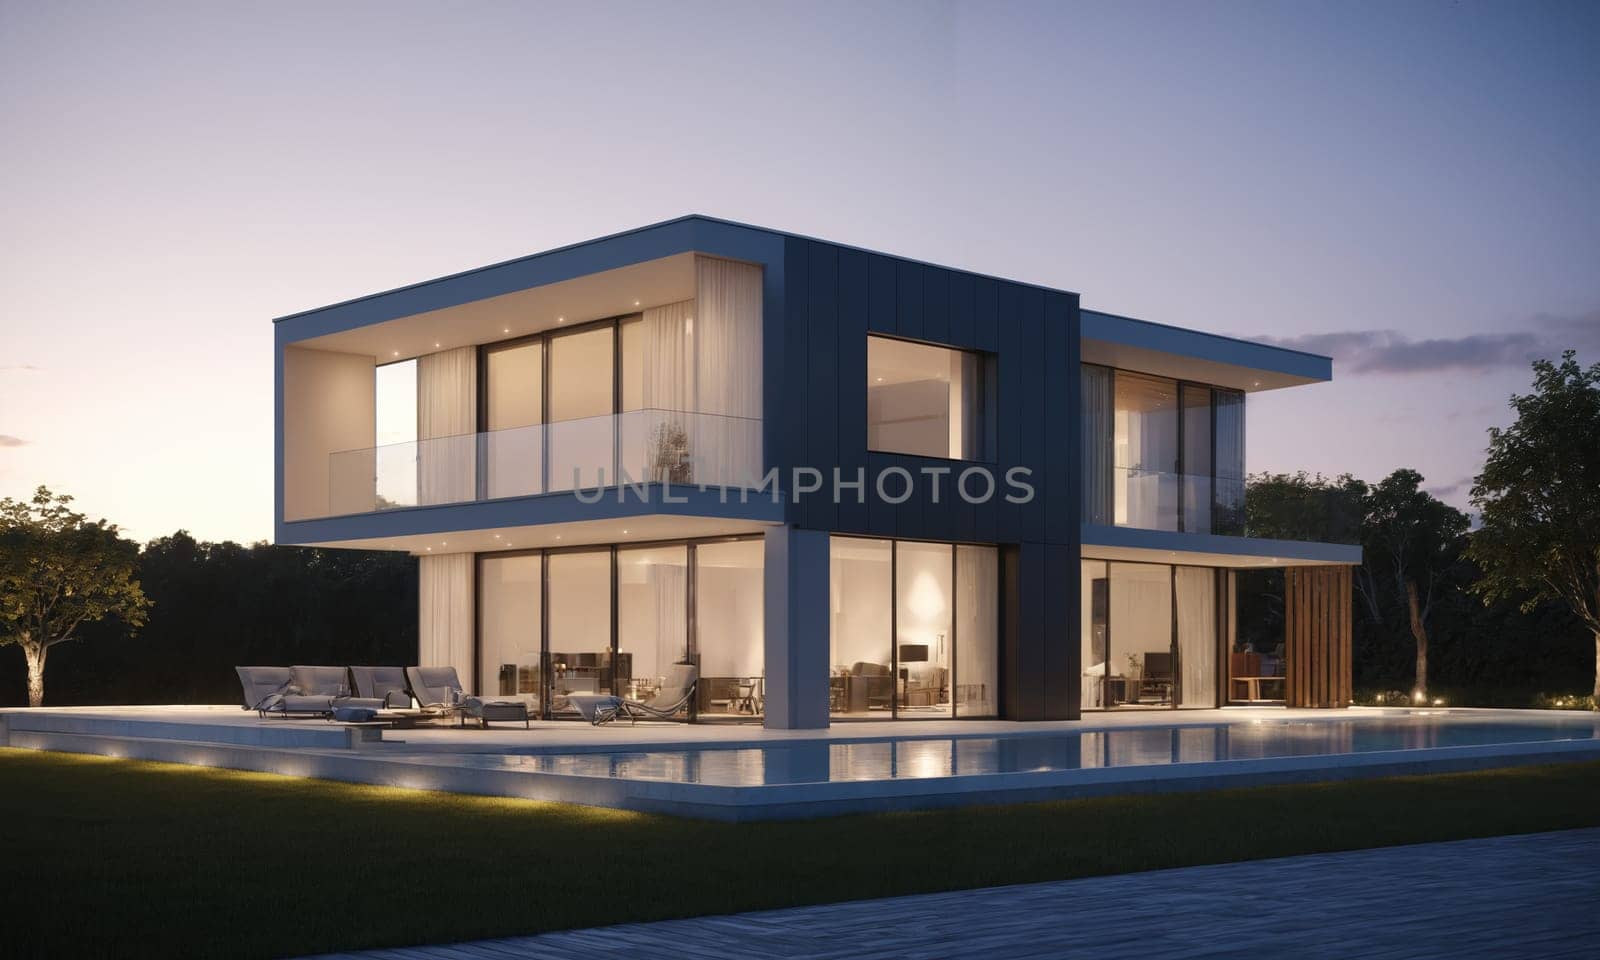 3d rendering of modern cozy house with pool and parking for sale or rent in luxurious style and beautiful landscaping on background. Clear summer evening with blue sky